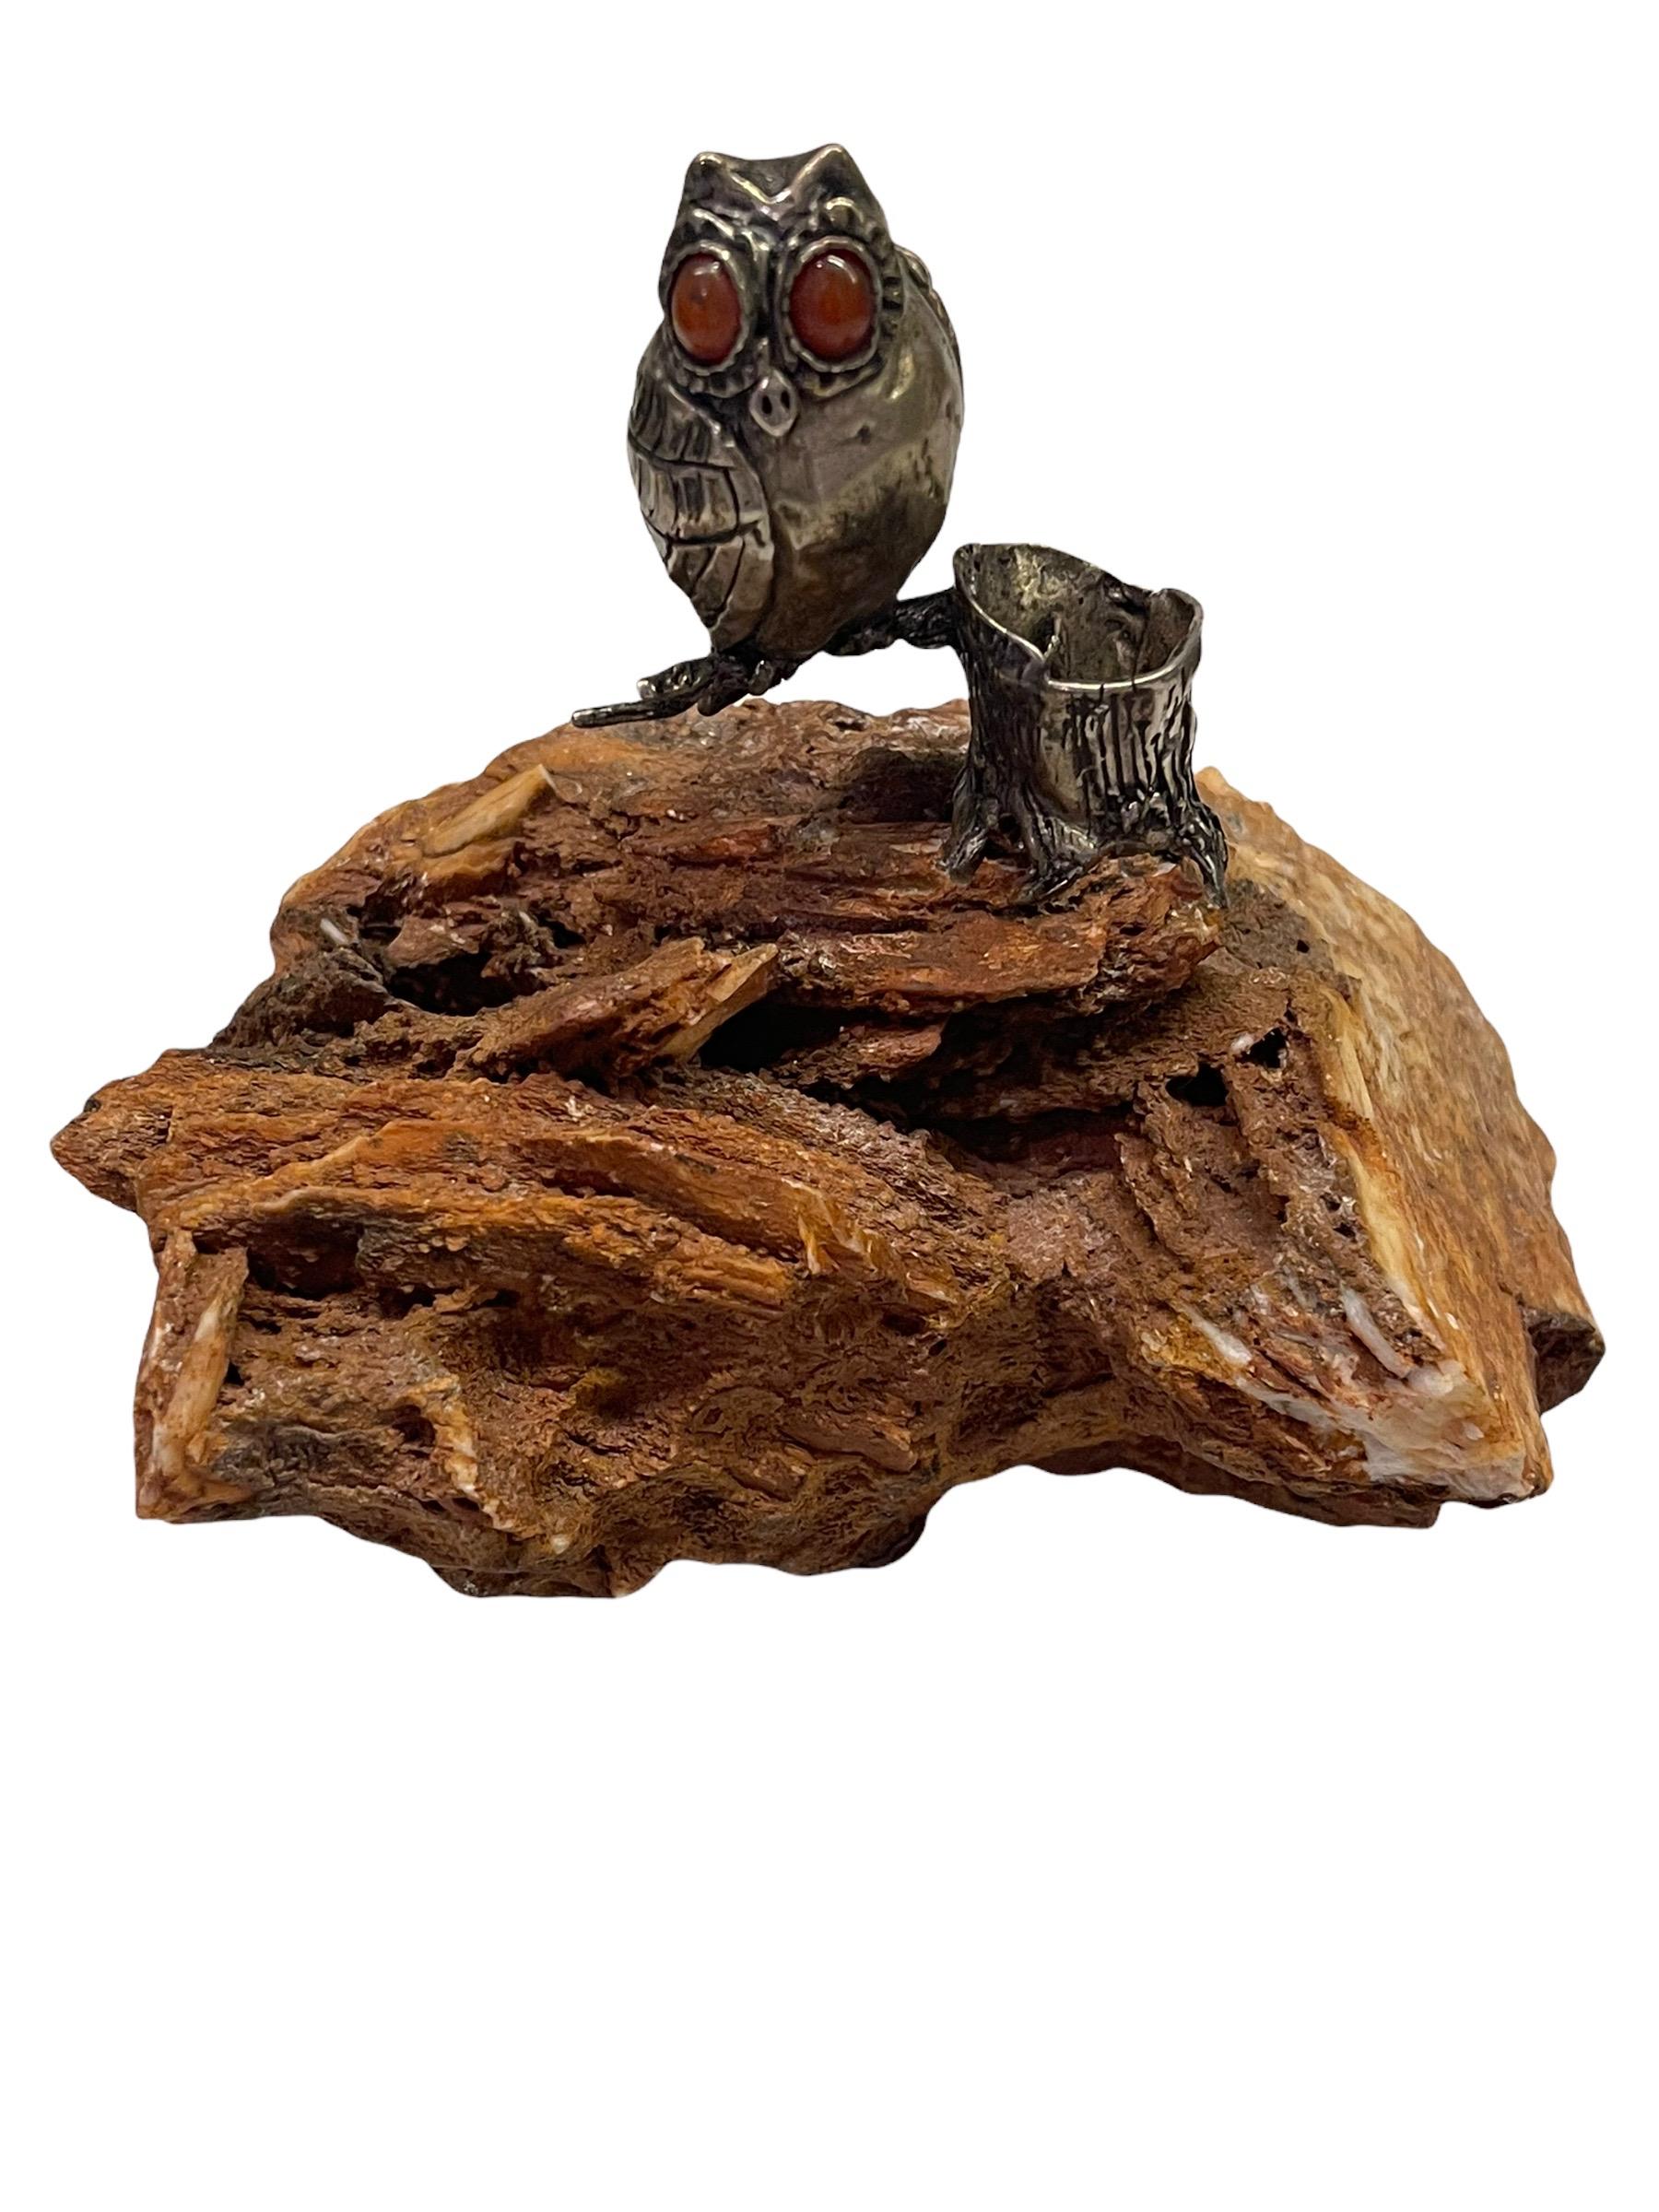 20th Century Cartier Sterling Silver Owl Figurine Perched on a Trunk. For Sale 5